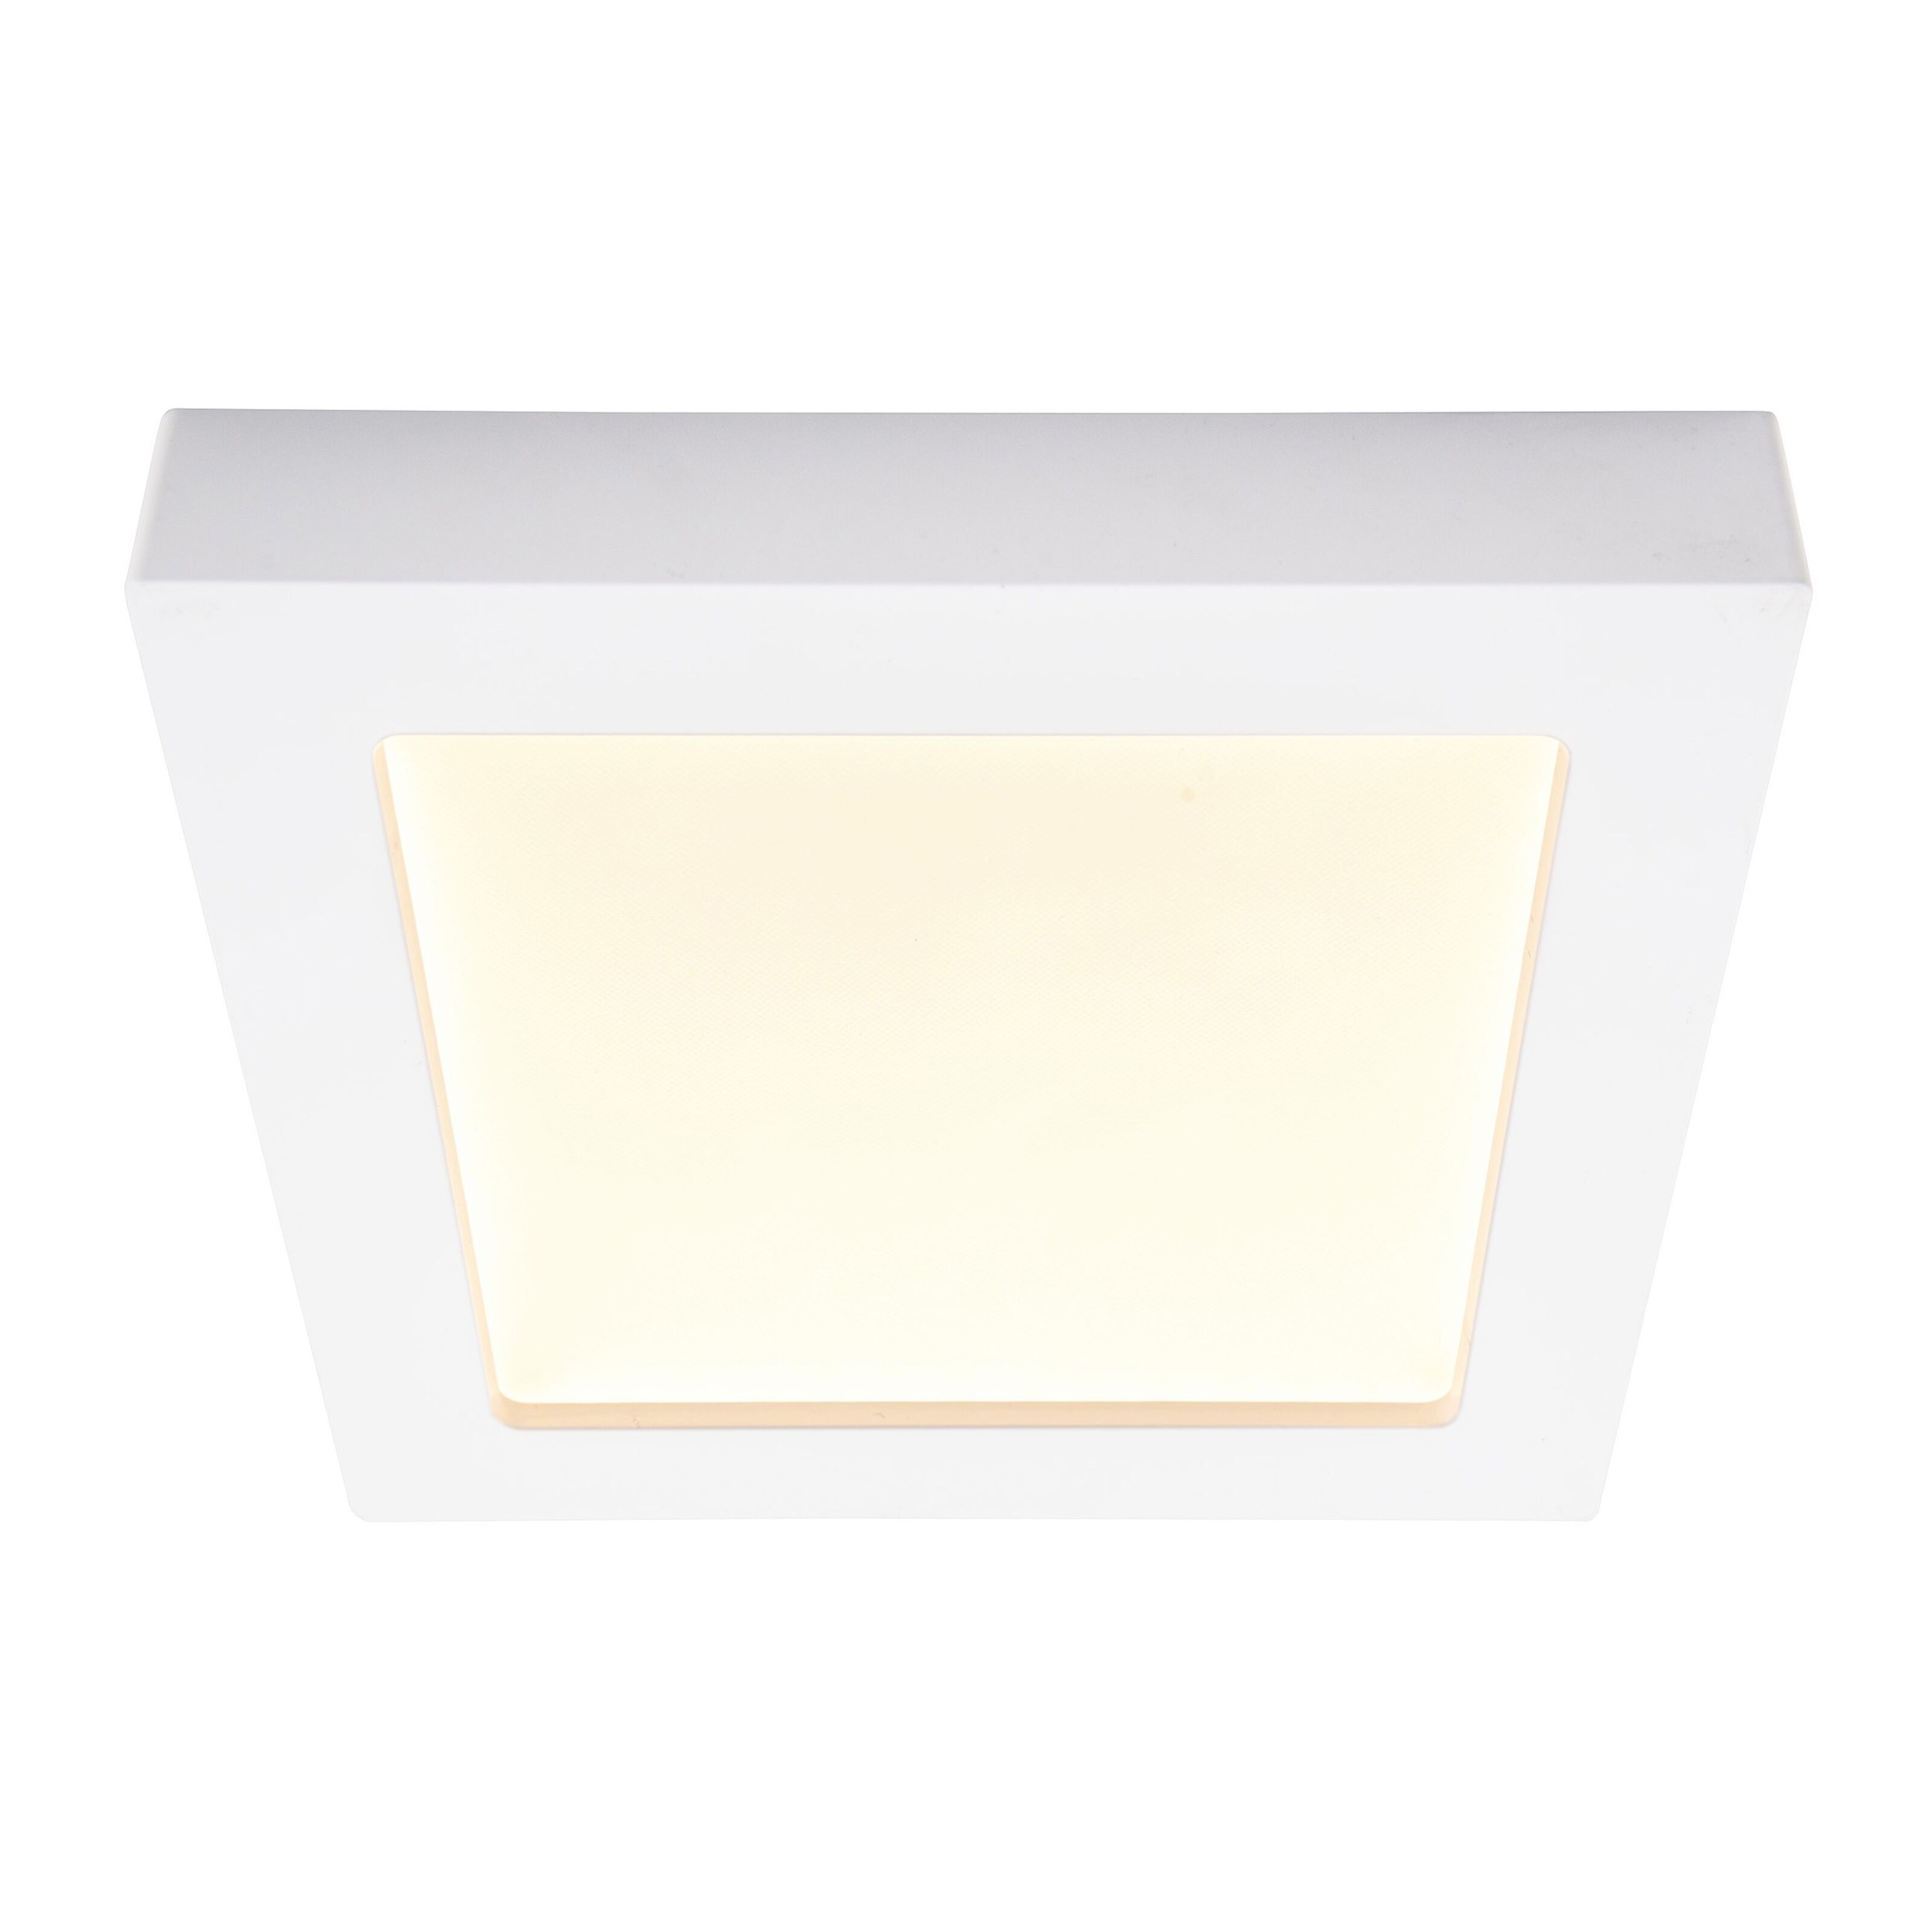 built-in/surface-mounted cm 22.7 light Buy wholesale s: LED \